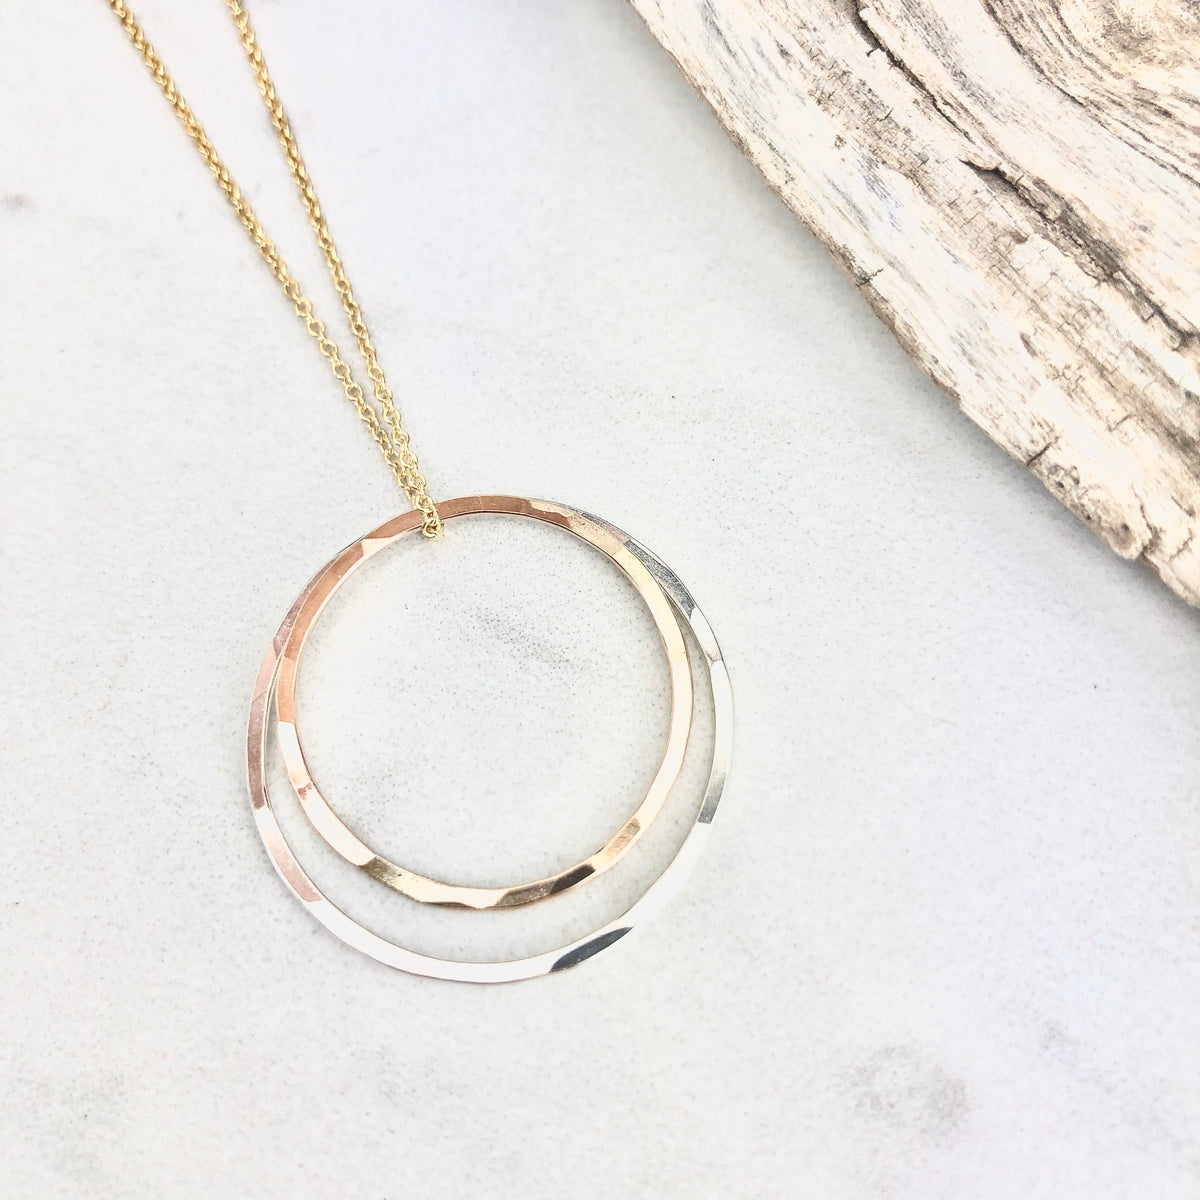 Sterling Silver Eclipse Pendant